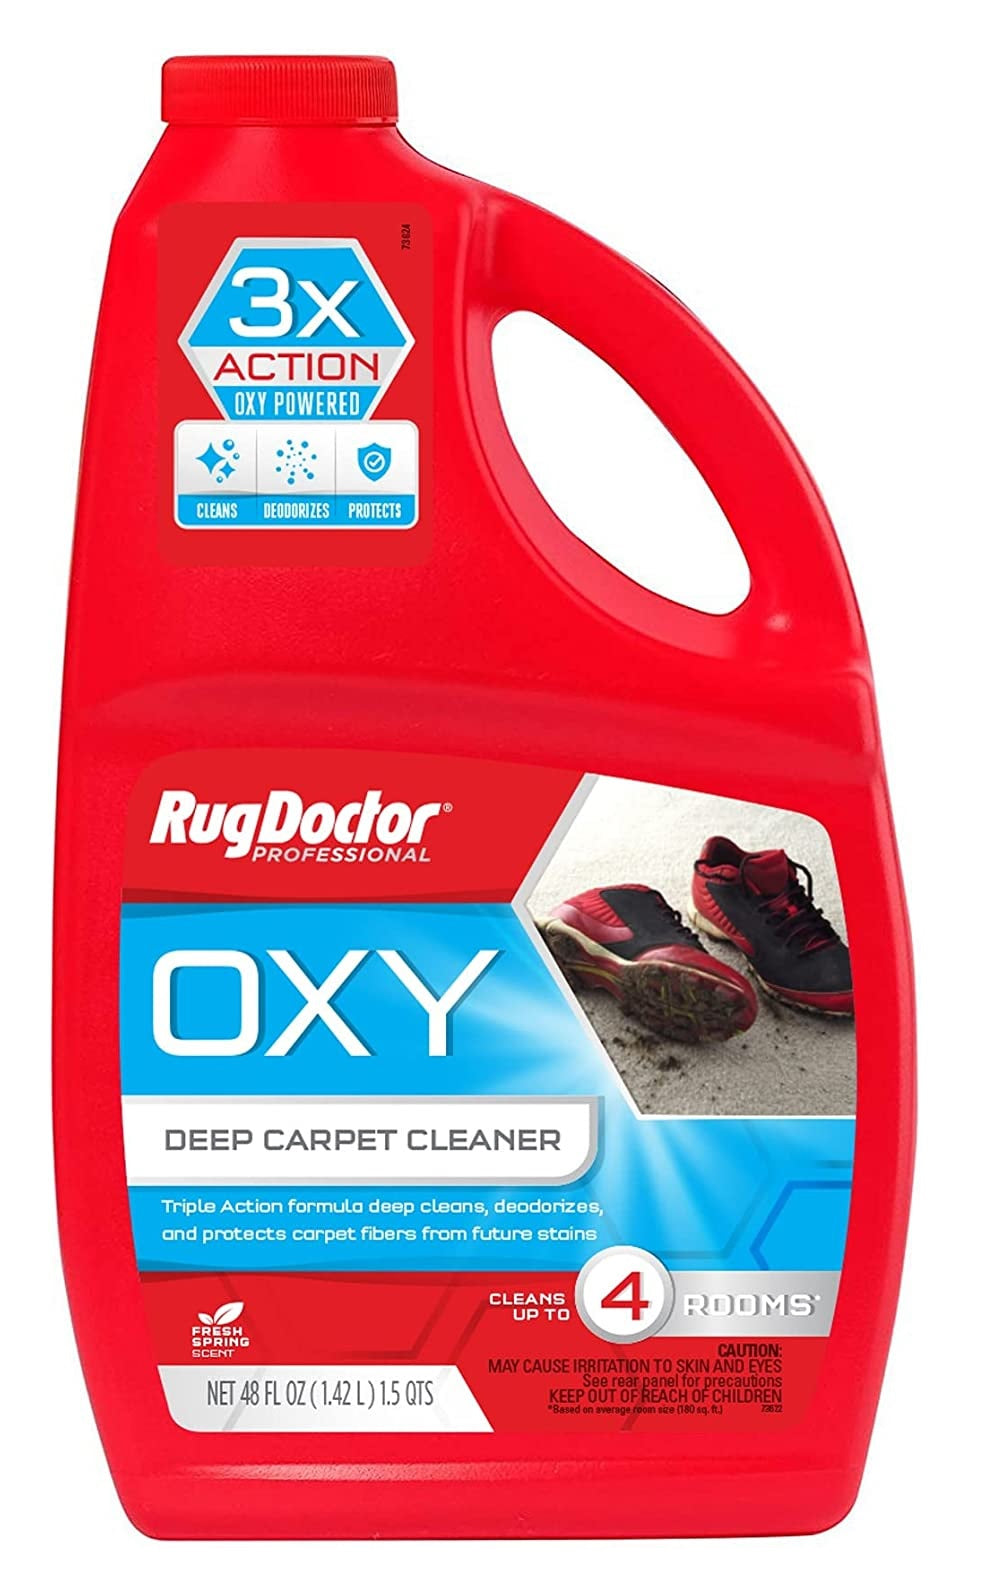 Rug Doctor 05045 3X Action OXY Carpet Cleaner, 48 Oz